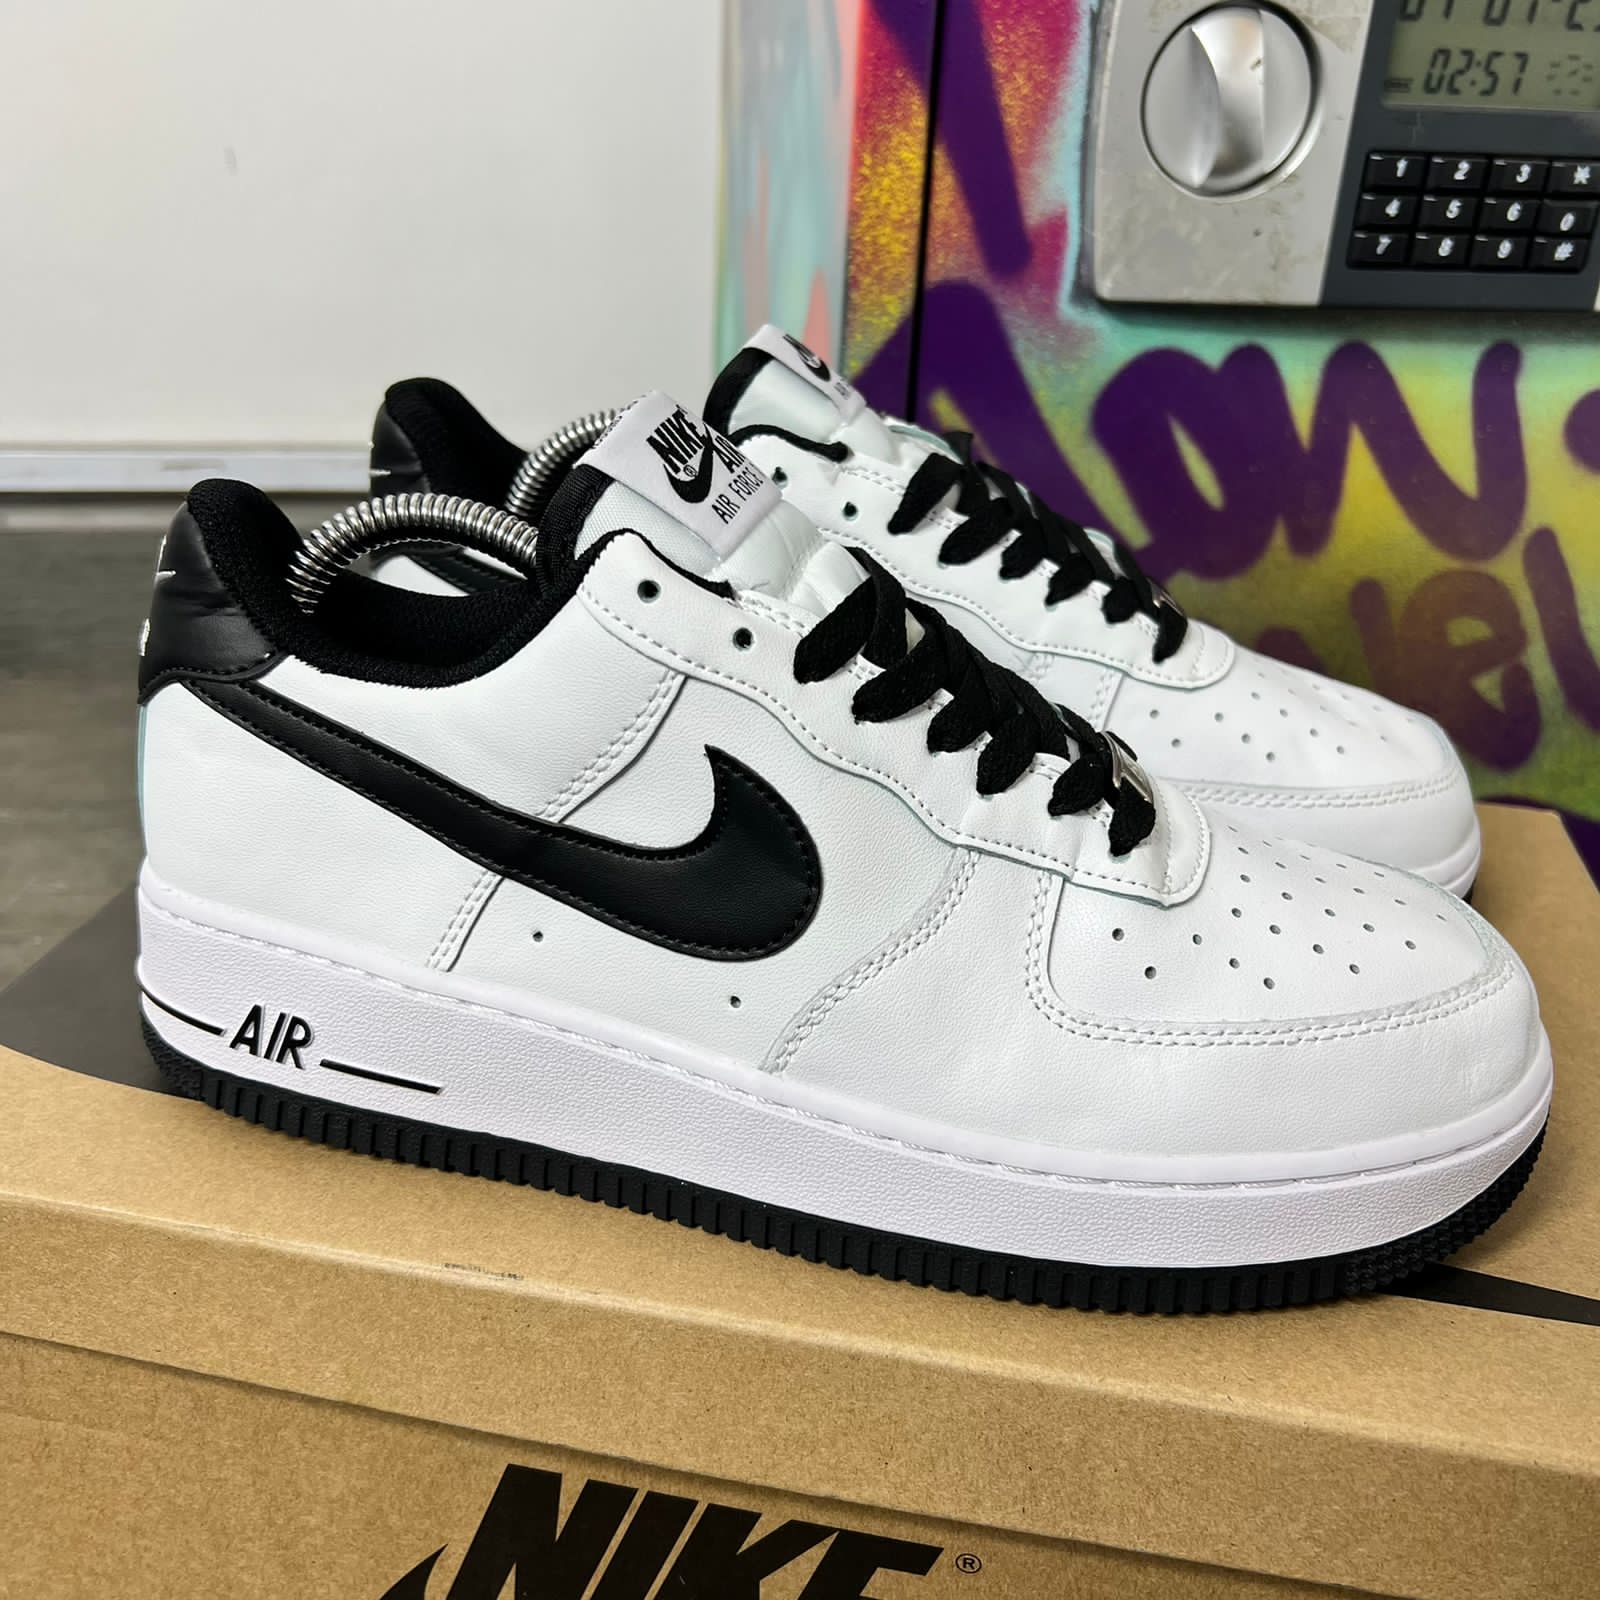 Nike air force one “AF1 chulo azul” – MONAKA ZAPATILLAS COLOMBIA